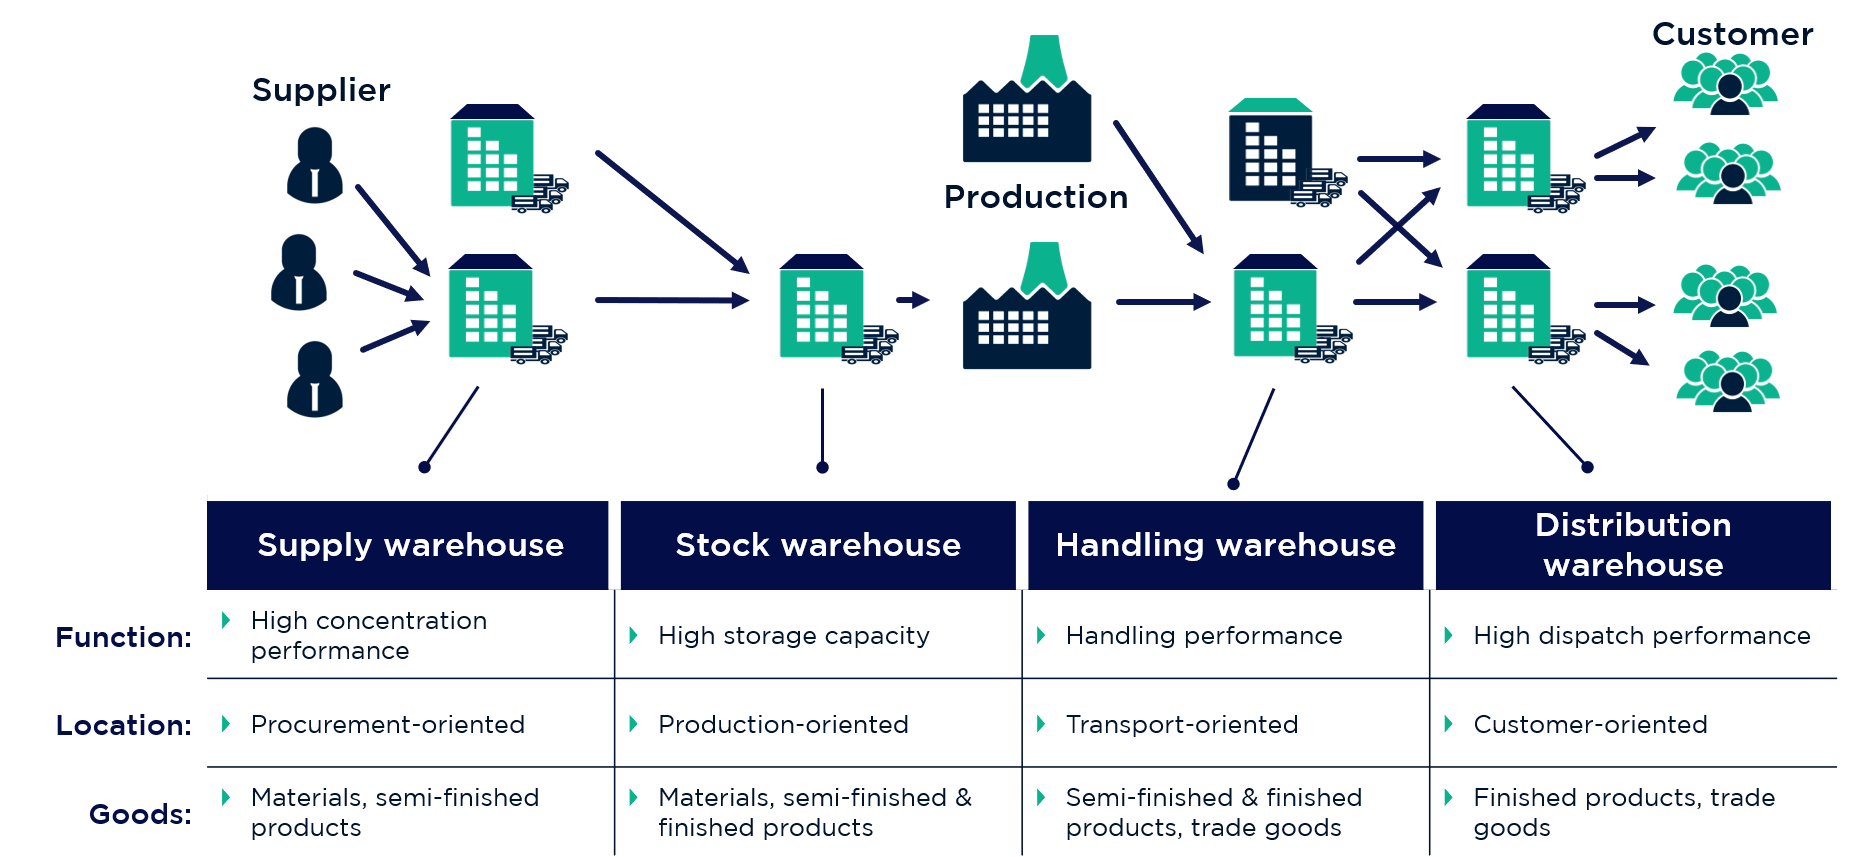 Different warehouse types